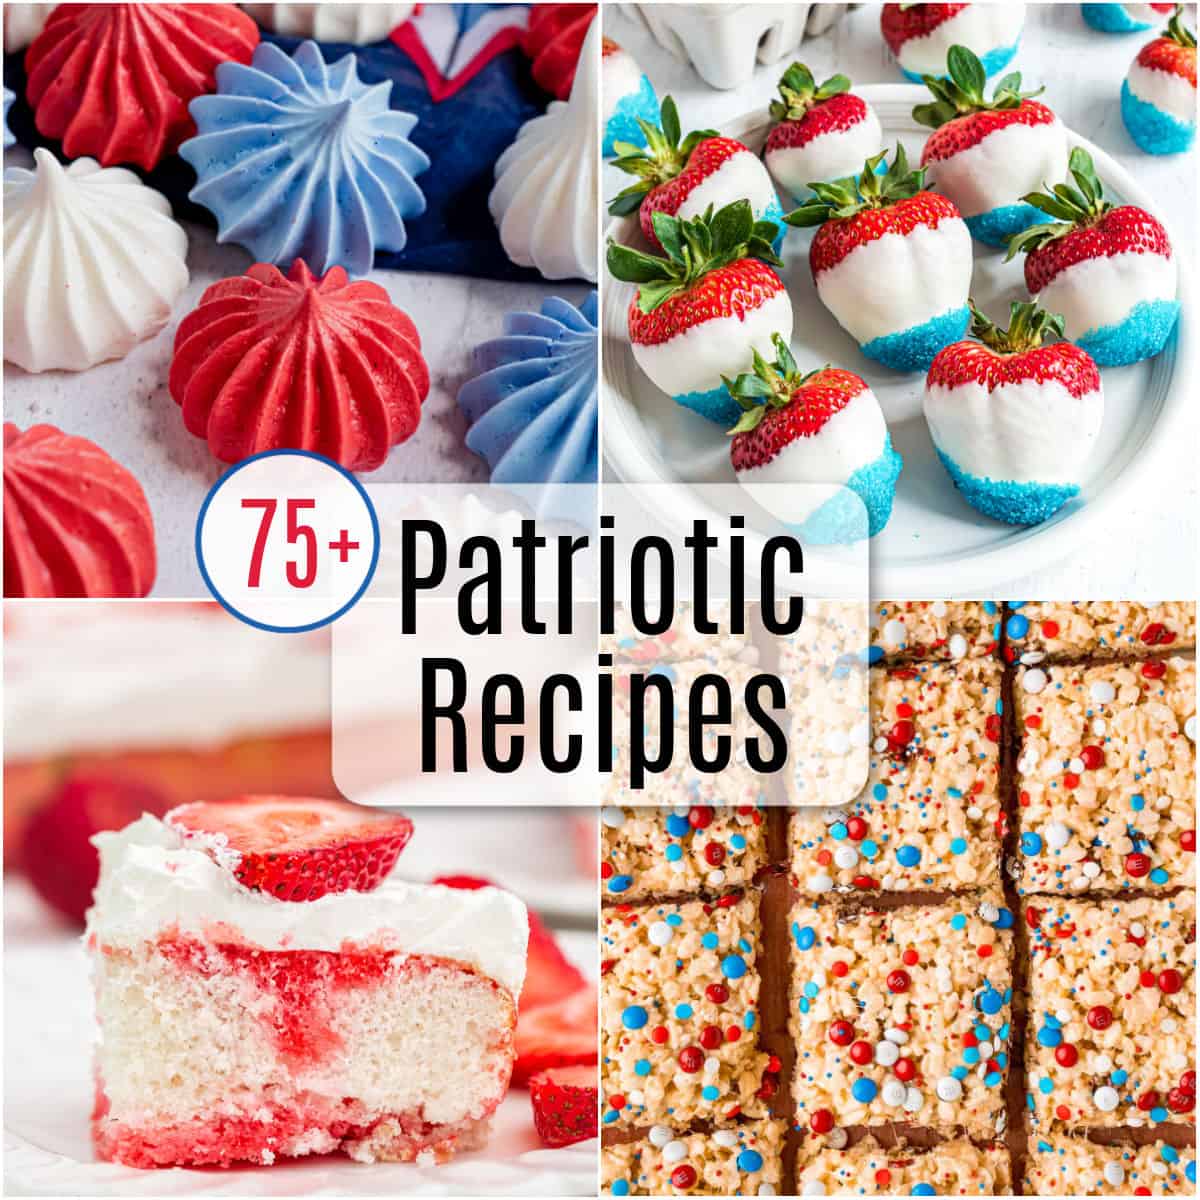 Four patriotic recipe photos for the fourth of July.